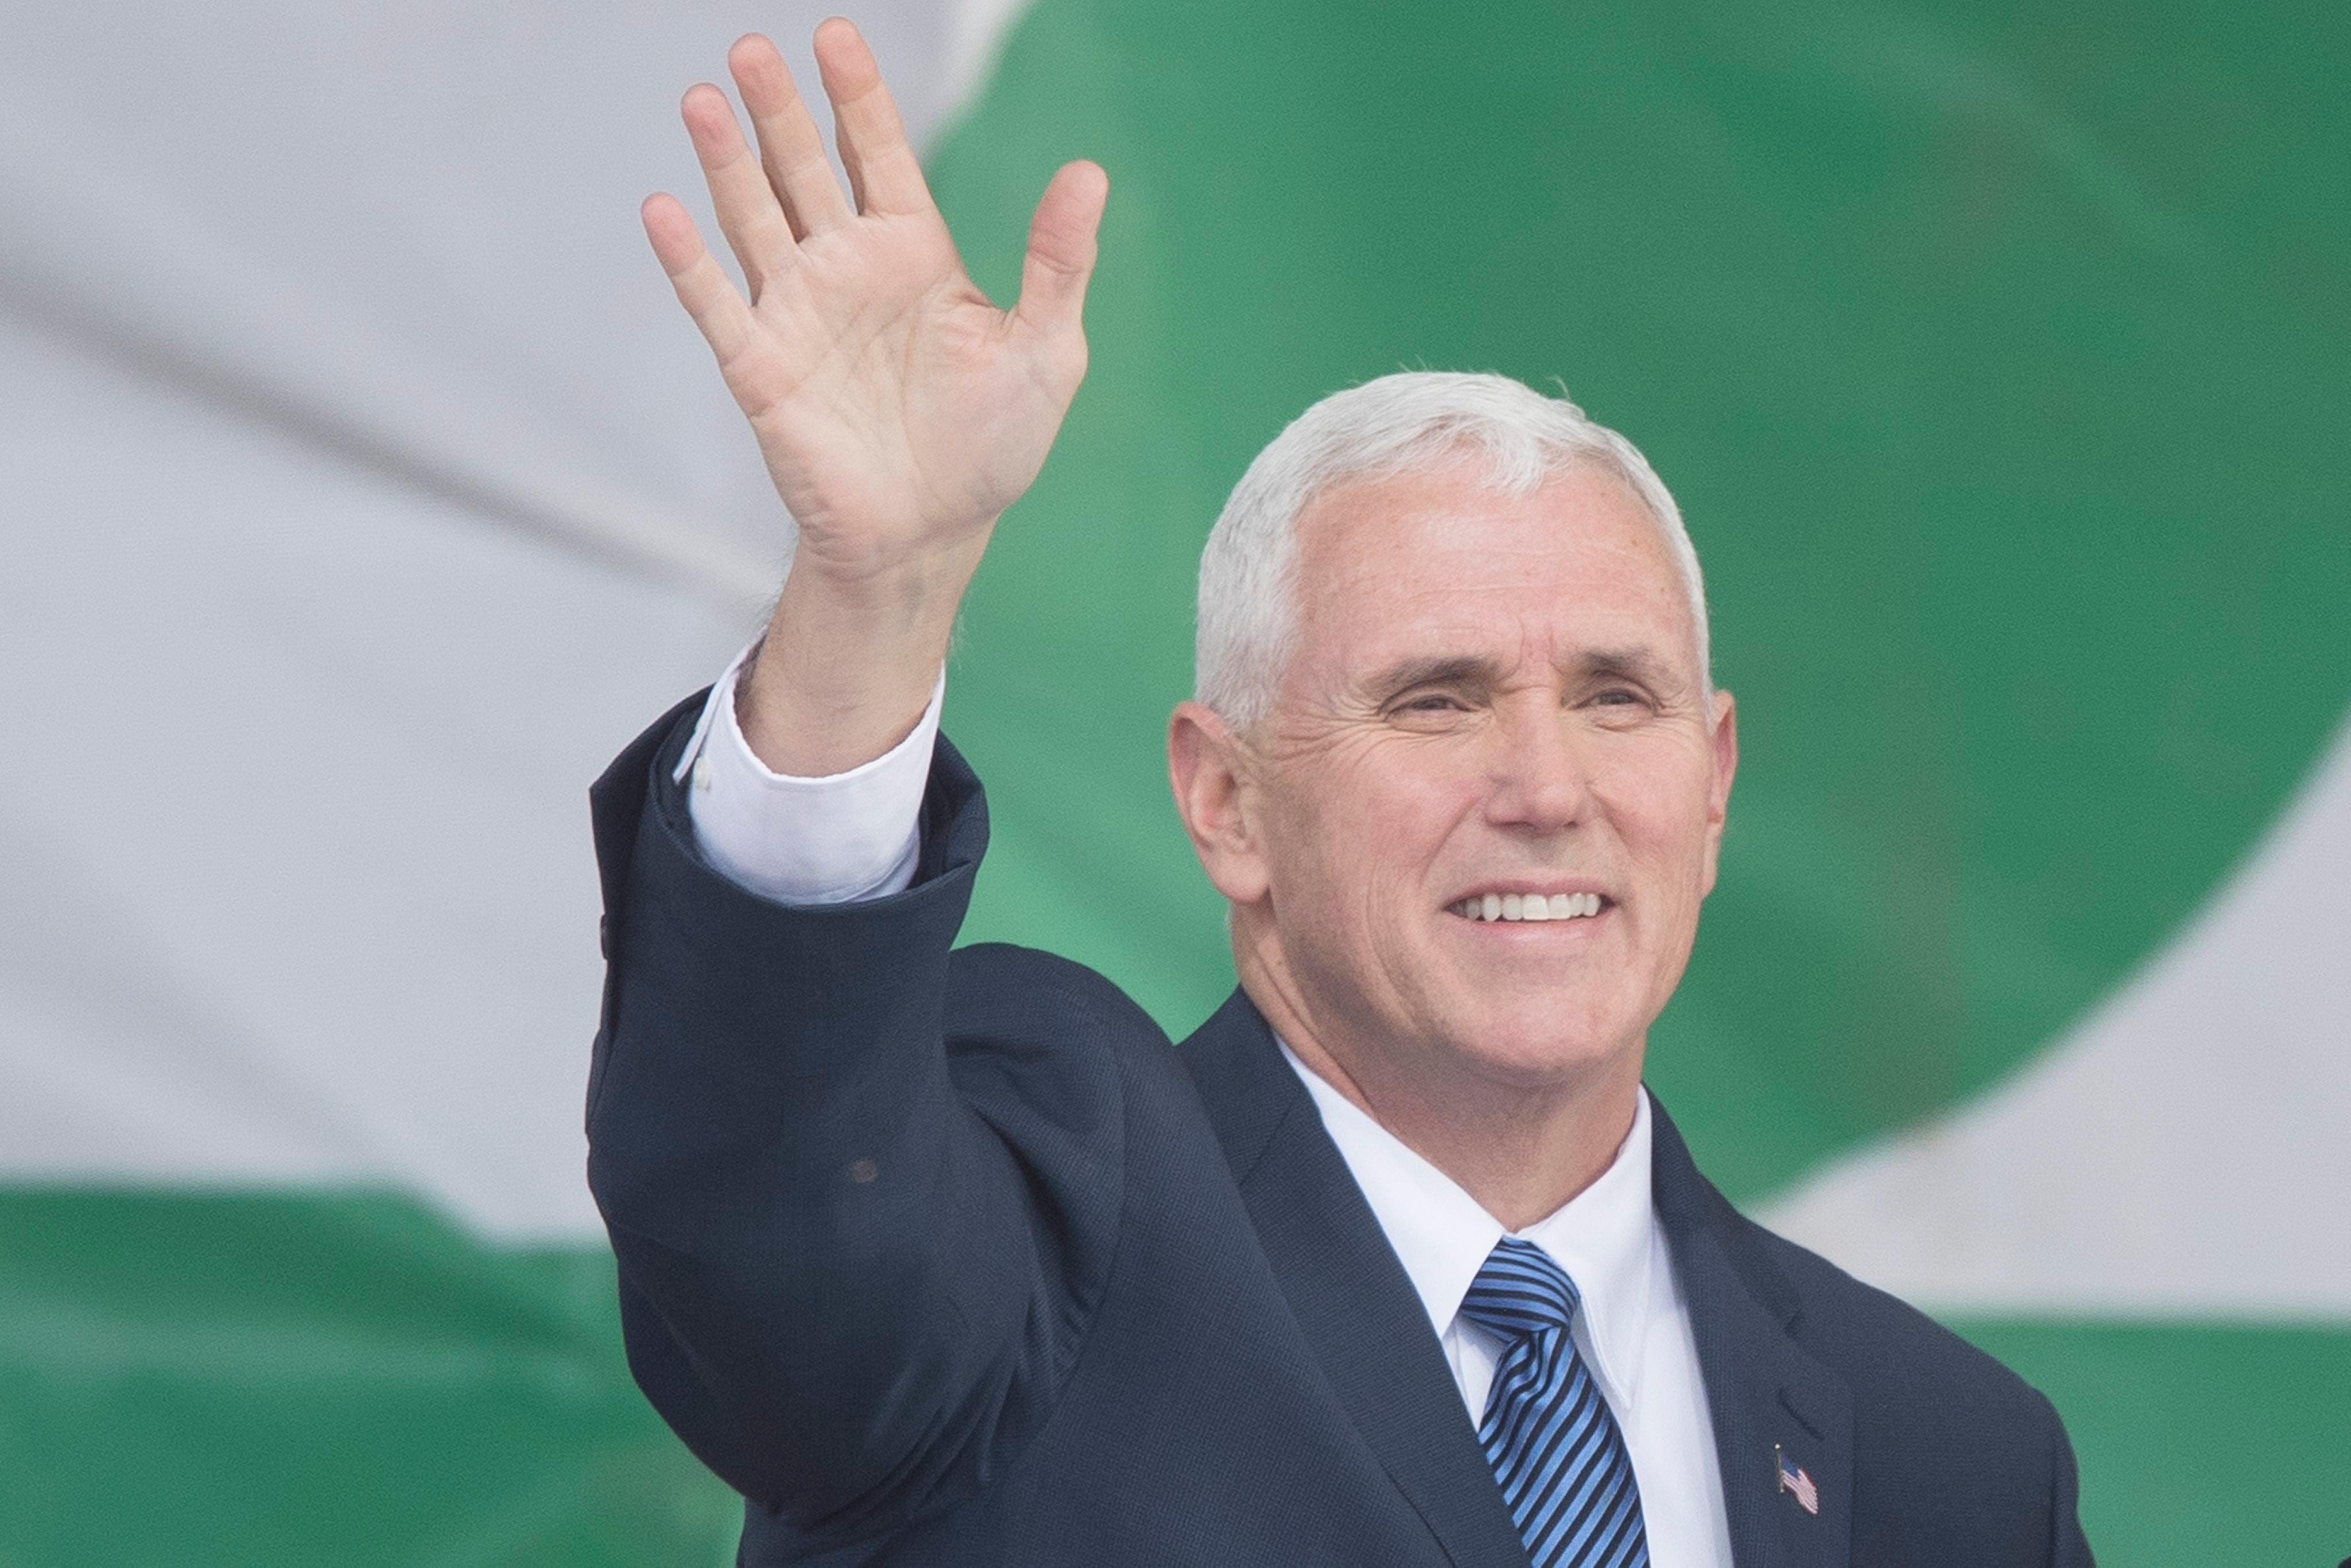 Federal judge rules Indiana abortion law signed by Pence unconstitutional